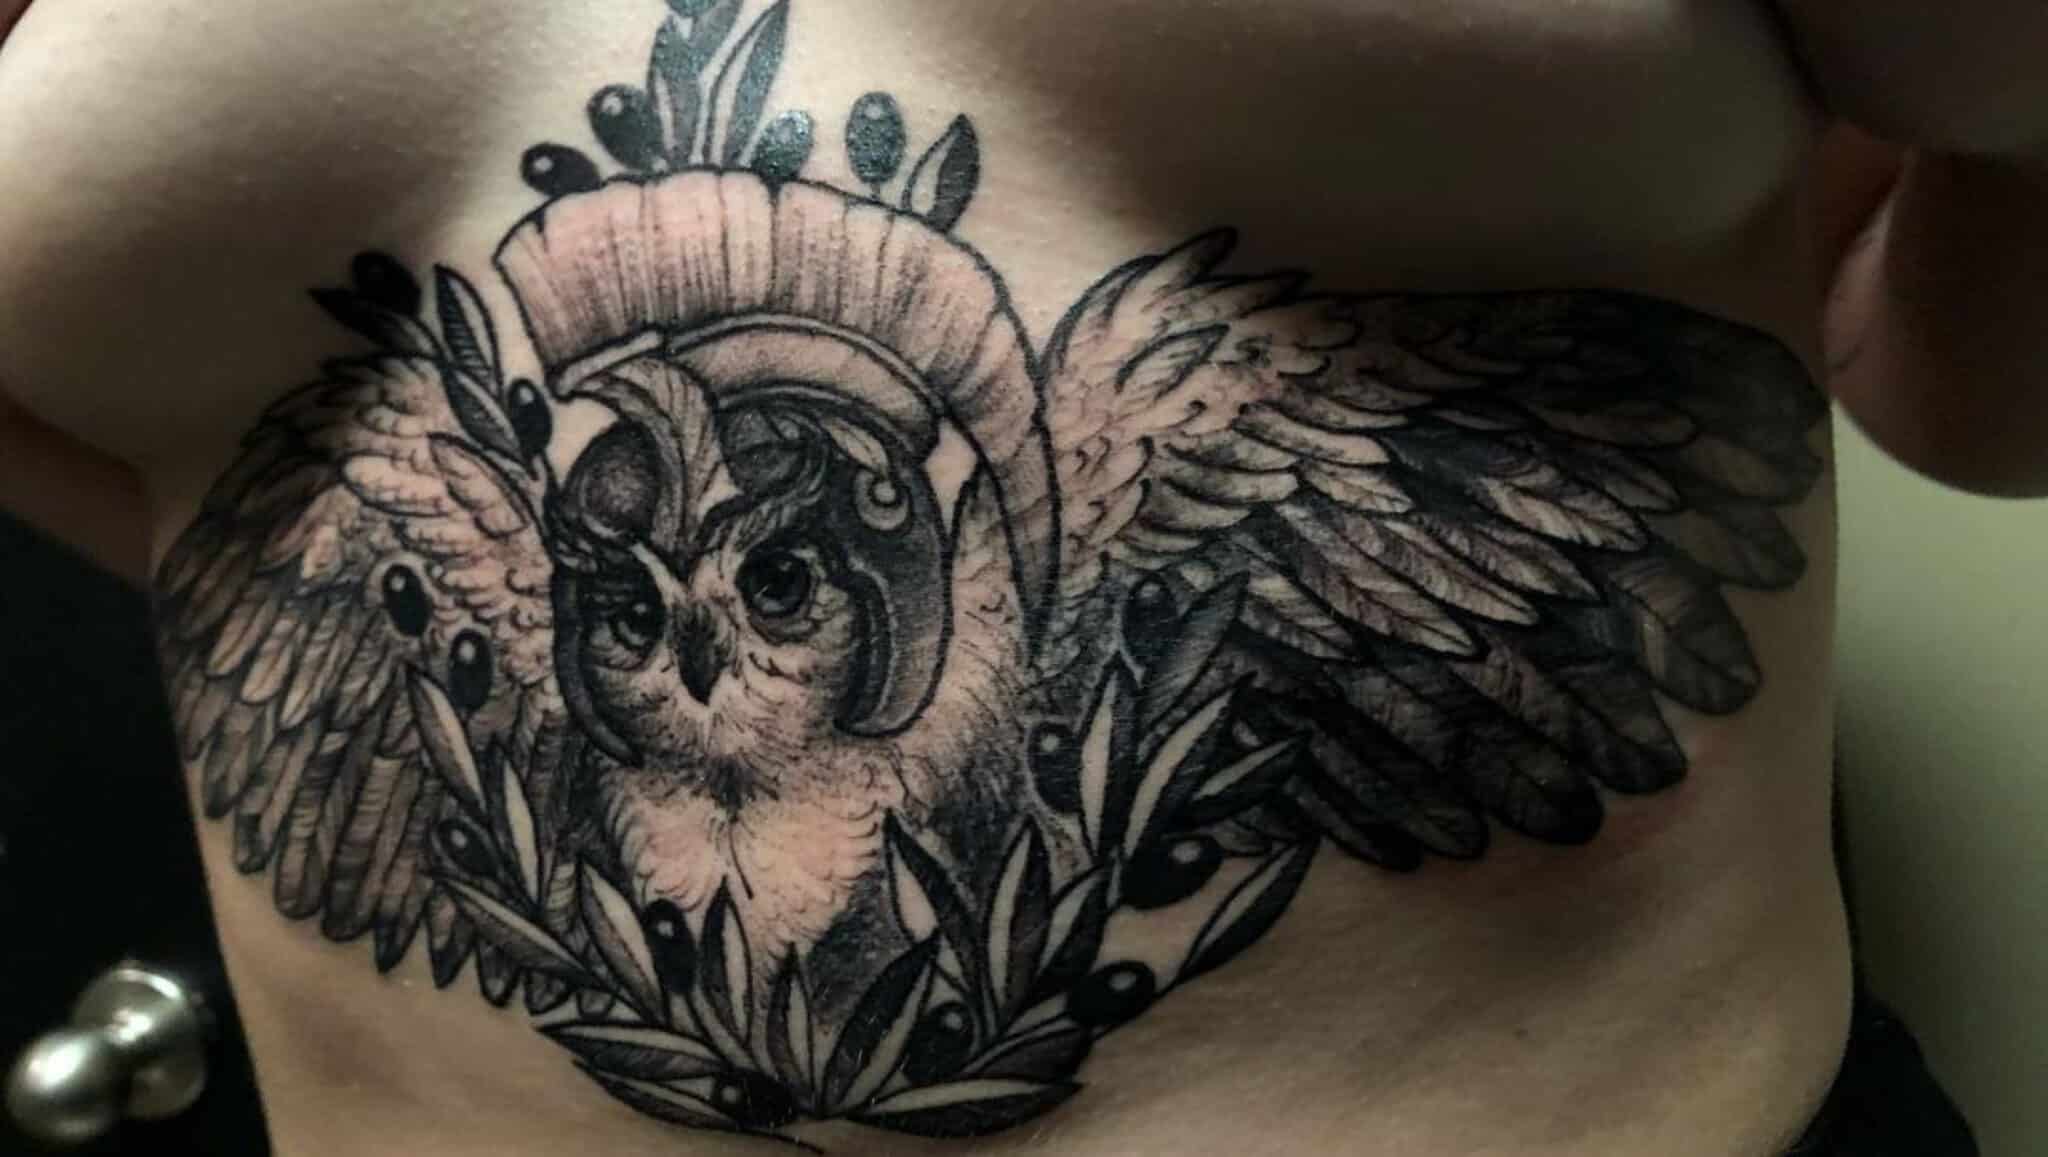 Owl tattoo on the stomach